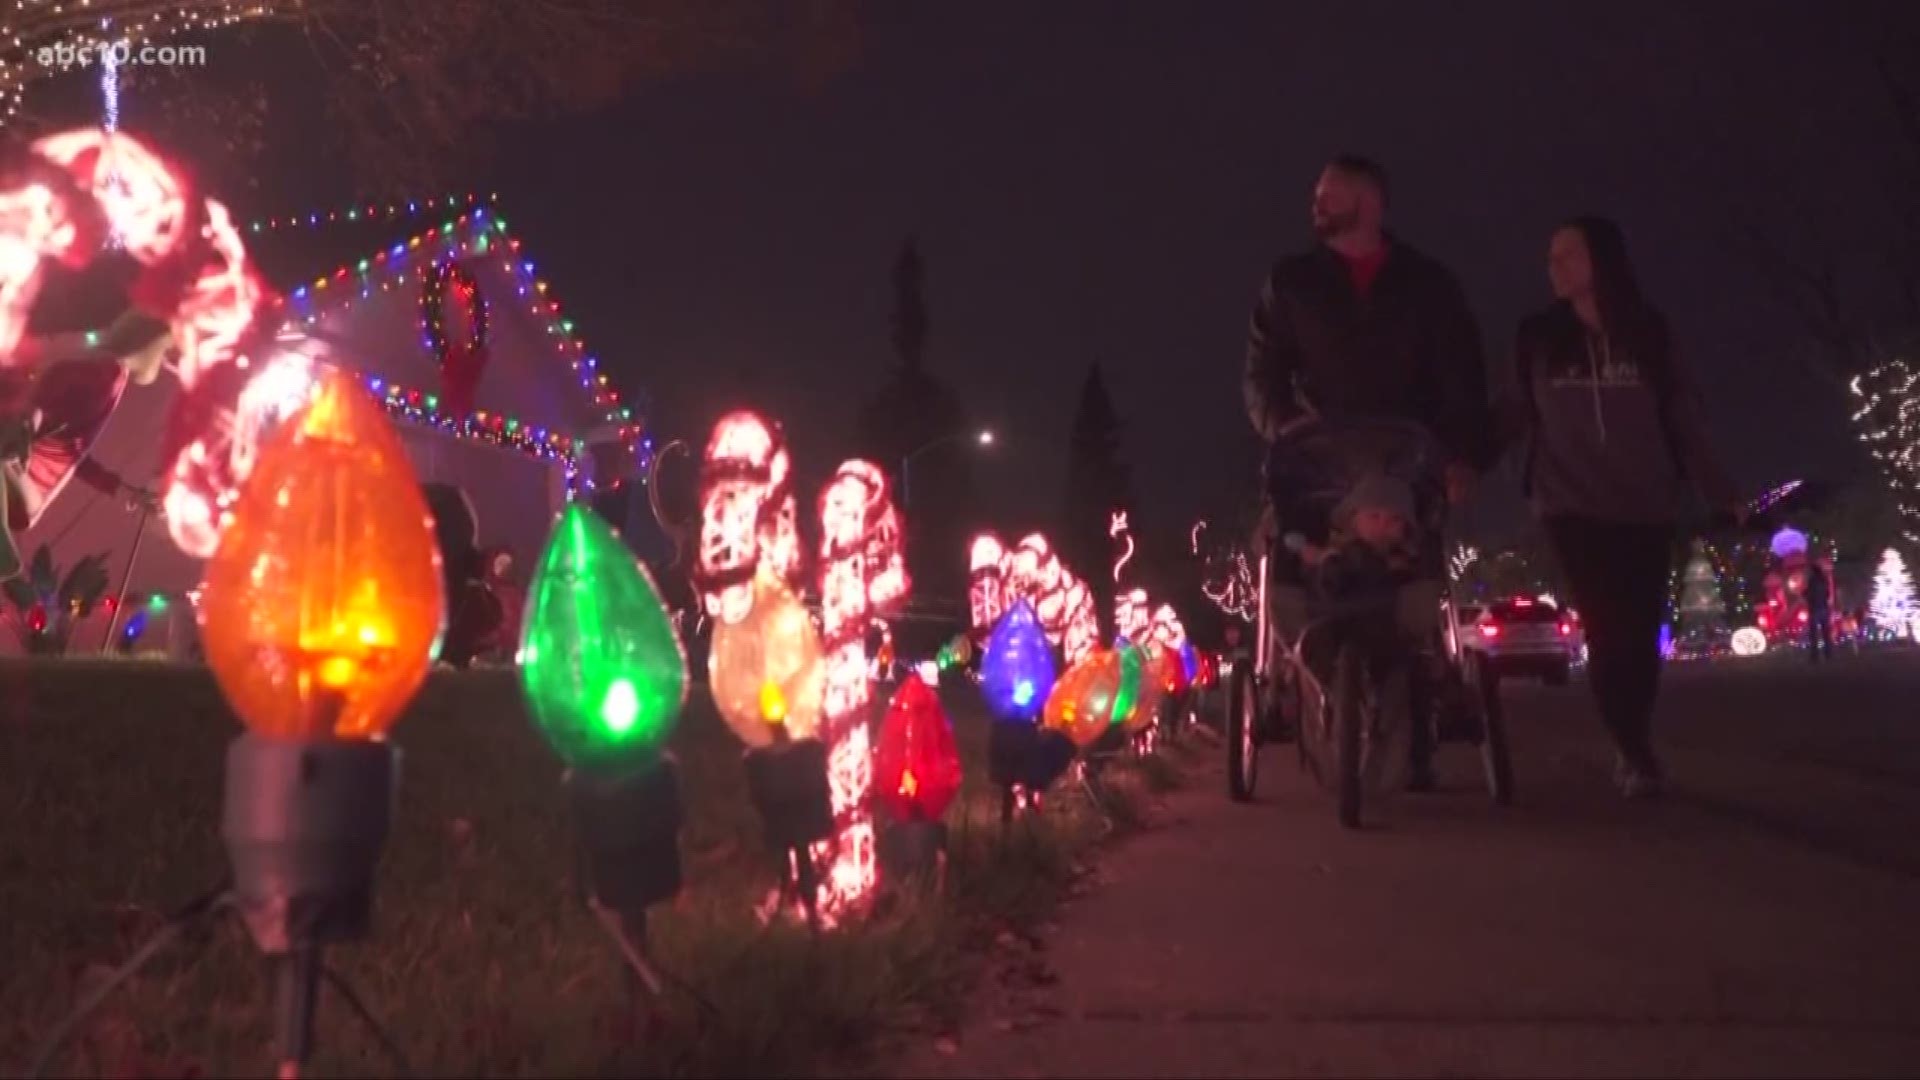 It's that time of year again where people are creating incredible displays. A neighborhood in Orangevale is famous for them. But now they are getting noticed by someone very famous.